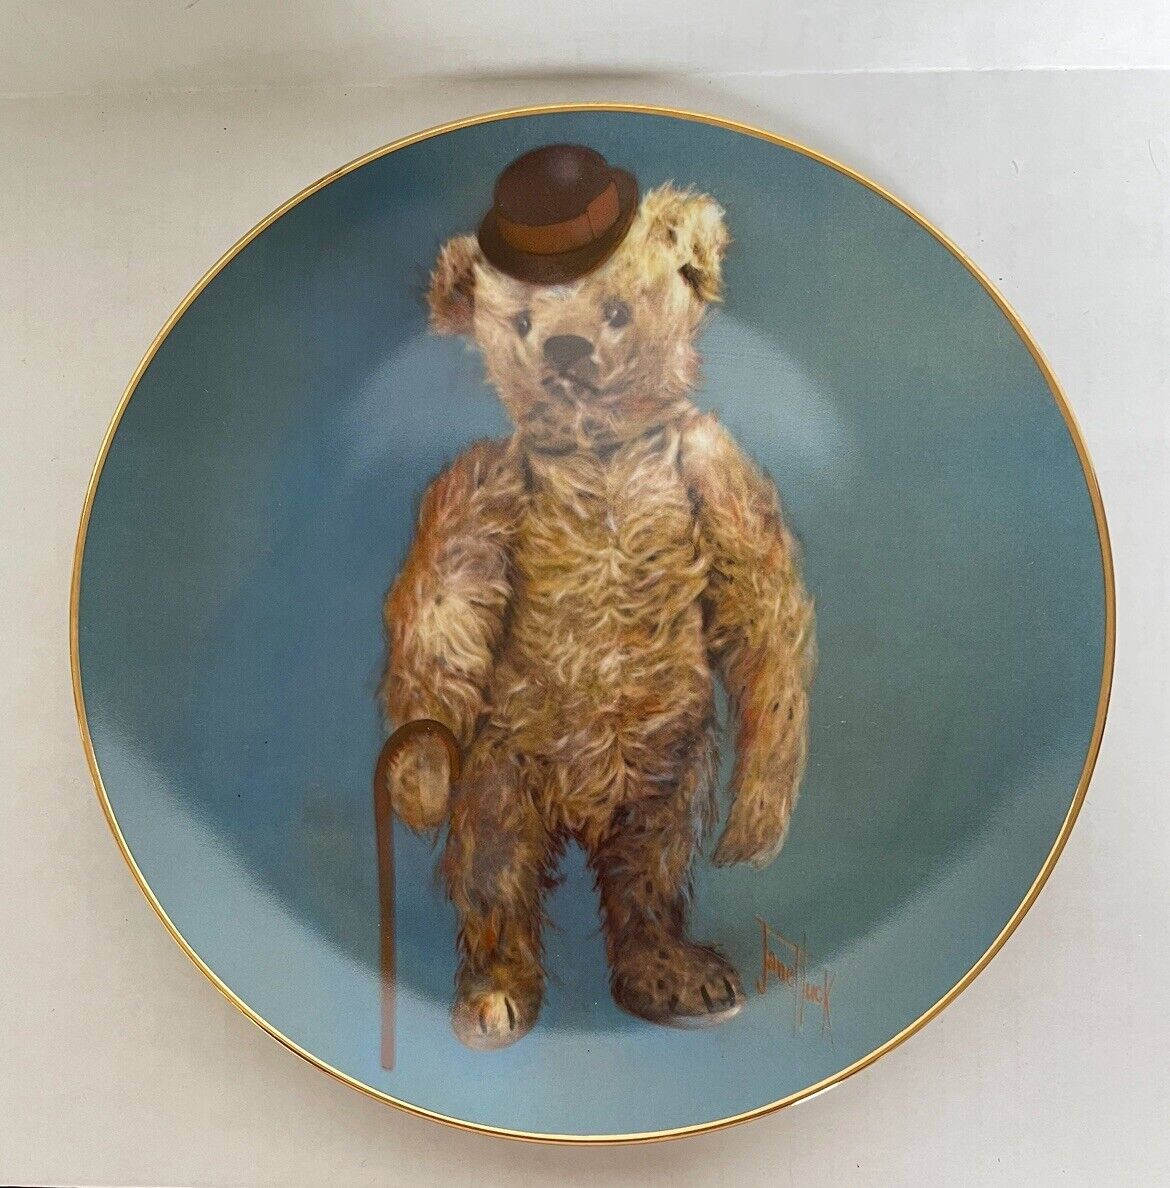 VINTAGE THIS OLE BEAR PLATE FROM THE ATTIC With Certificate Of Authenticity